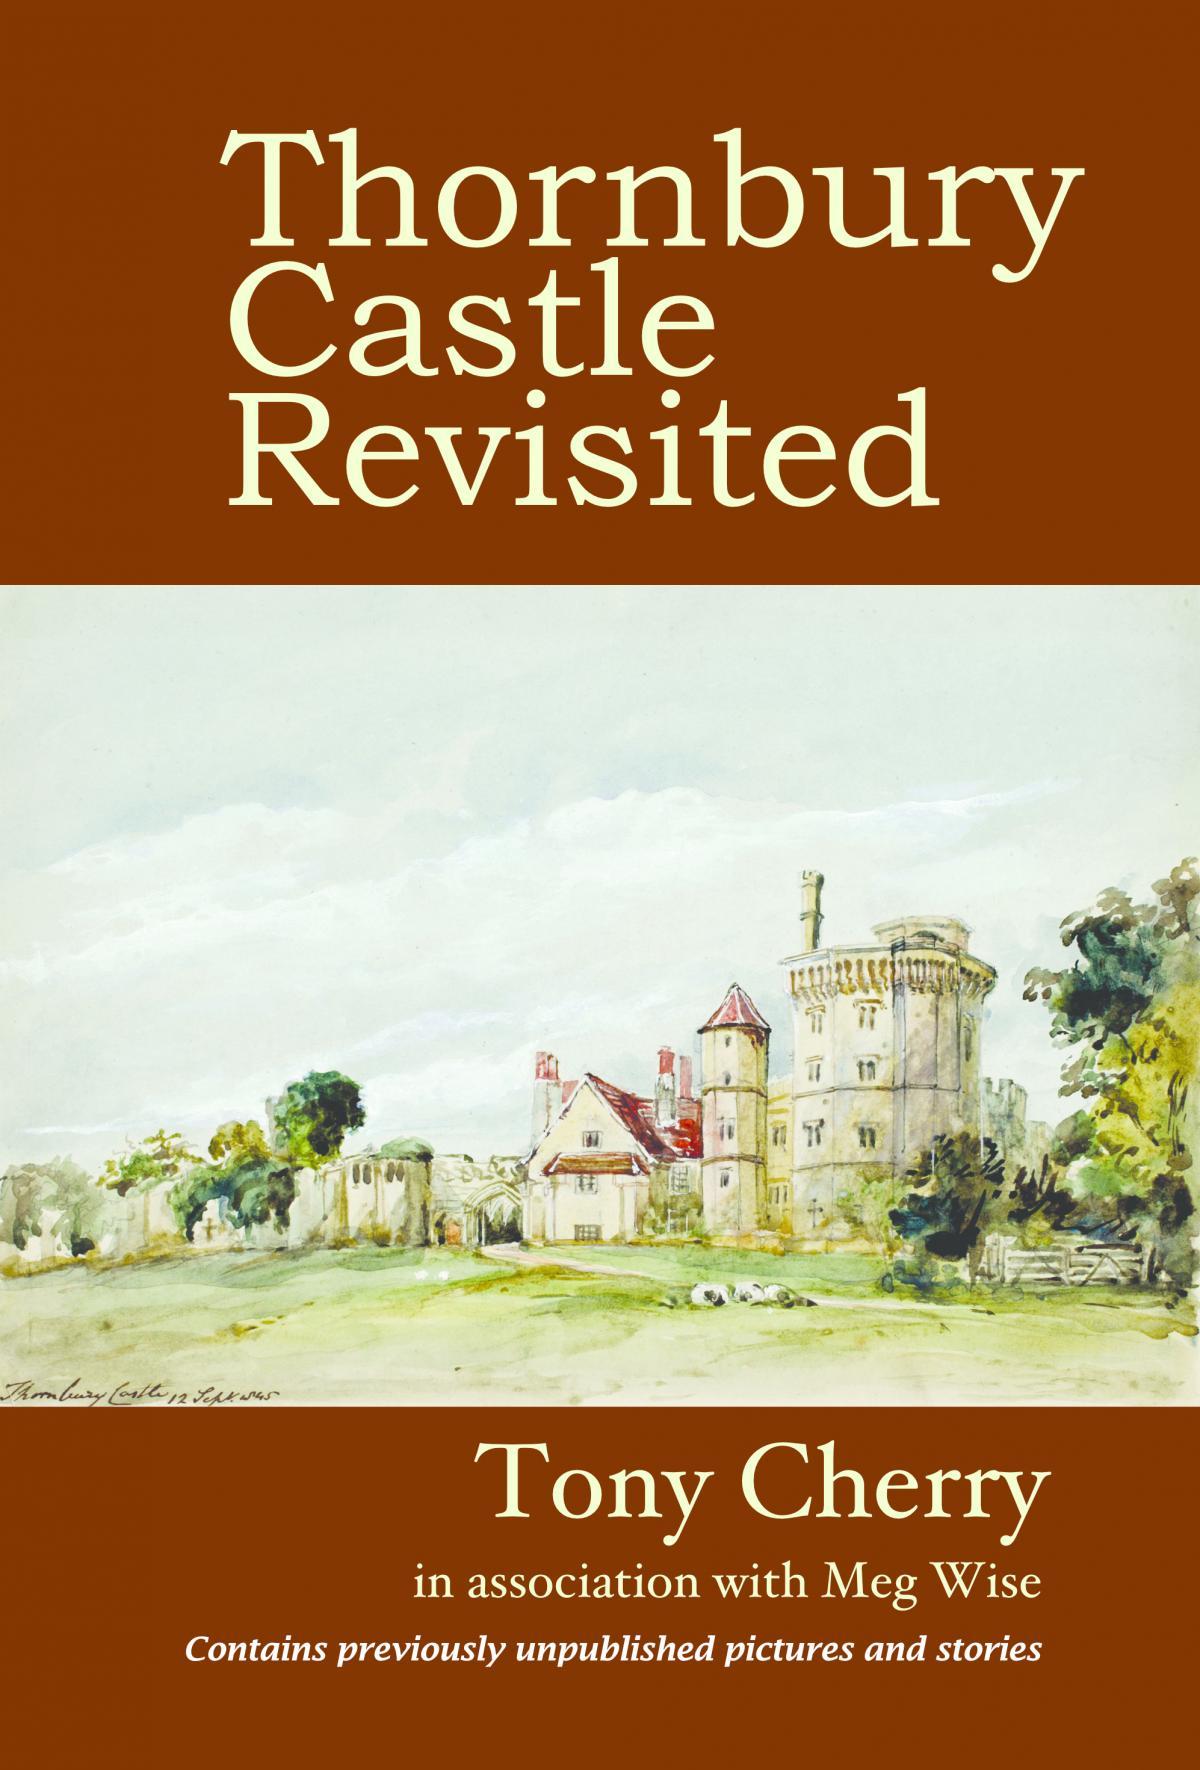 Thornbury Castle Revisited is available to buy through Thornbury & District Museum 